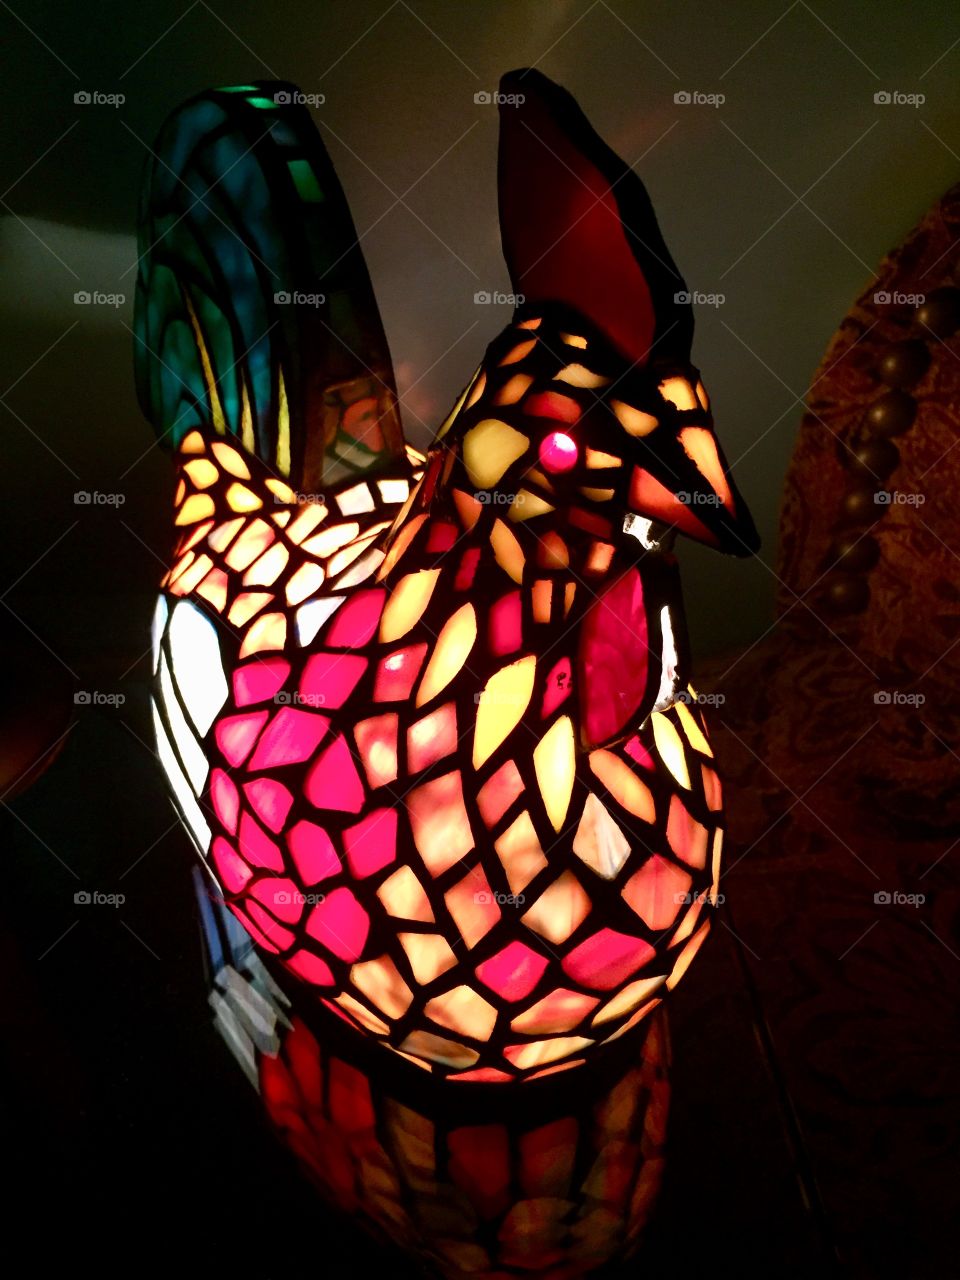 Unique lamp. Mosaic chicken. Rooster light. A farmer’s art. Color and design.